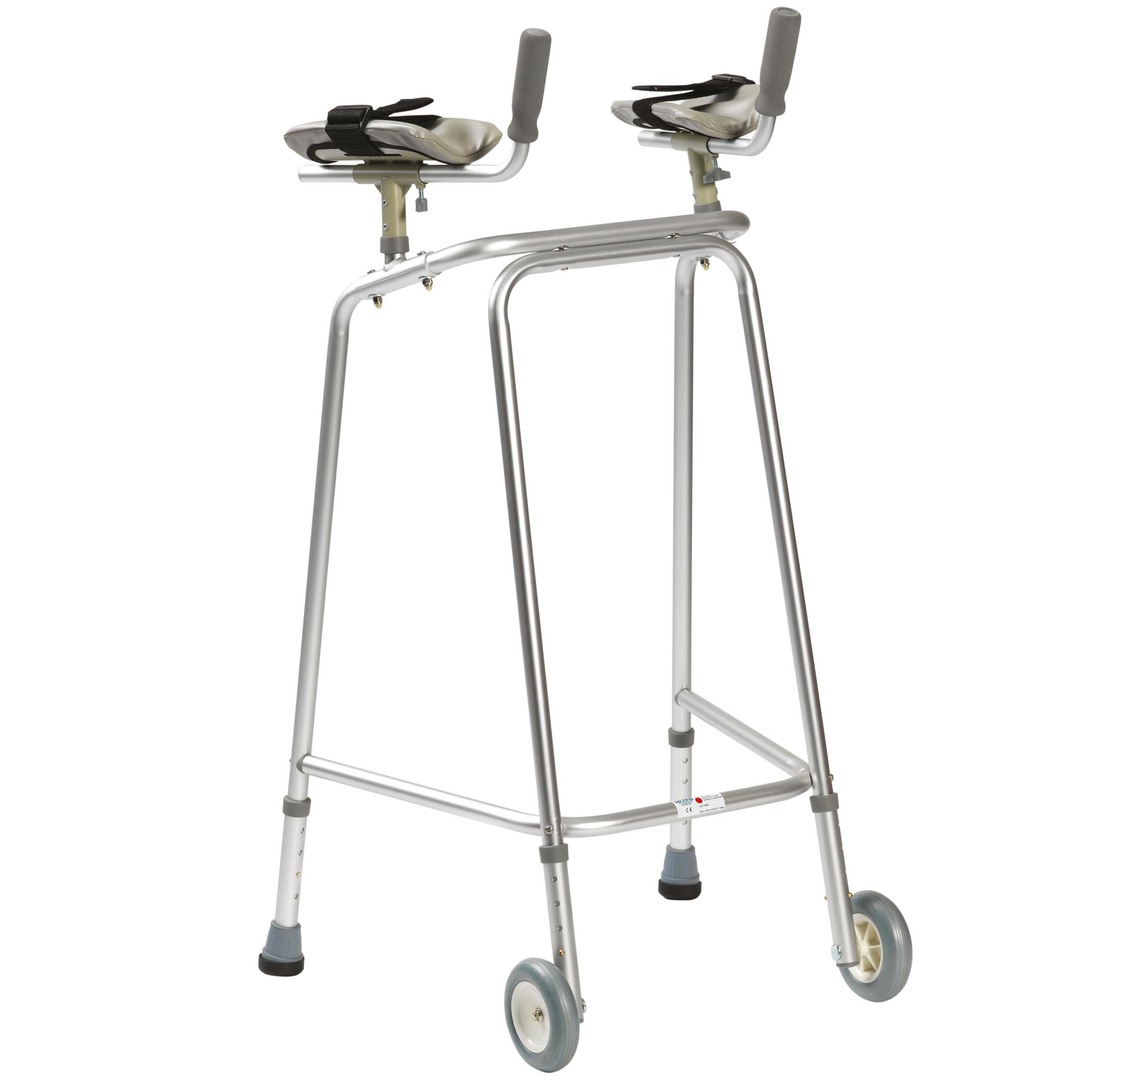 Rigid Walker With Wheels & Forearms | Medical Supermarket